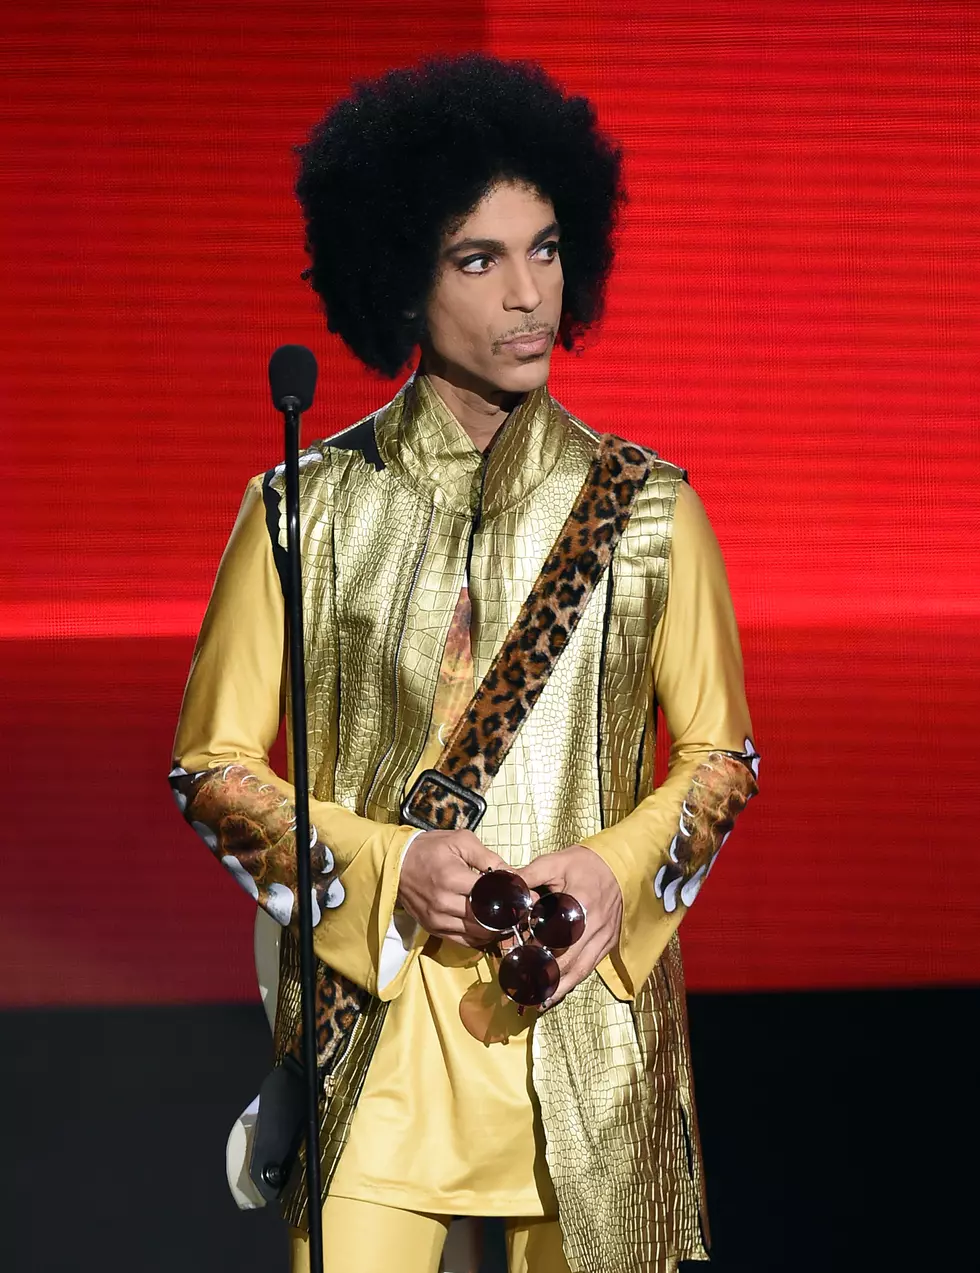 Prince Autopsy Scheduled For Today &#8211; Tha Wire